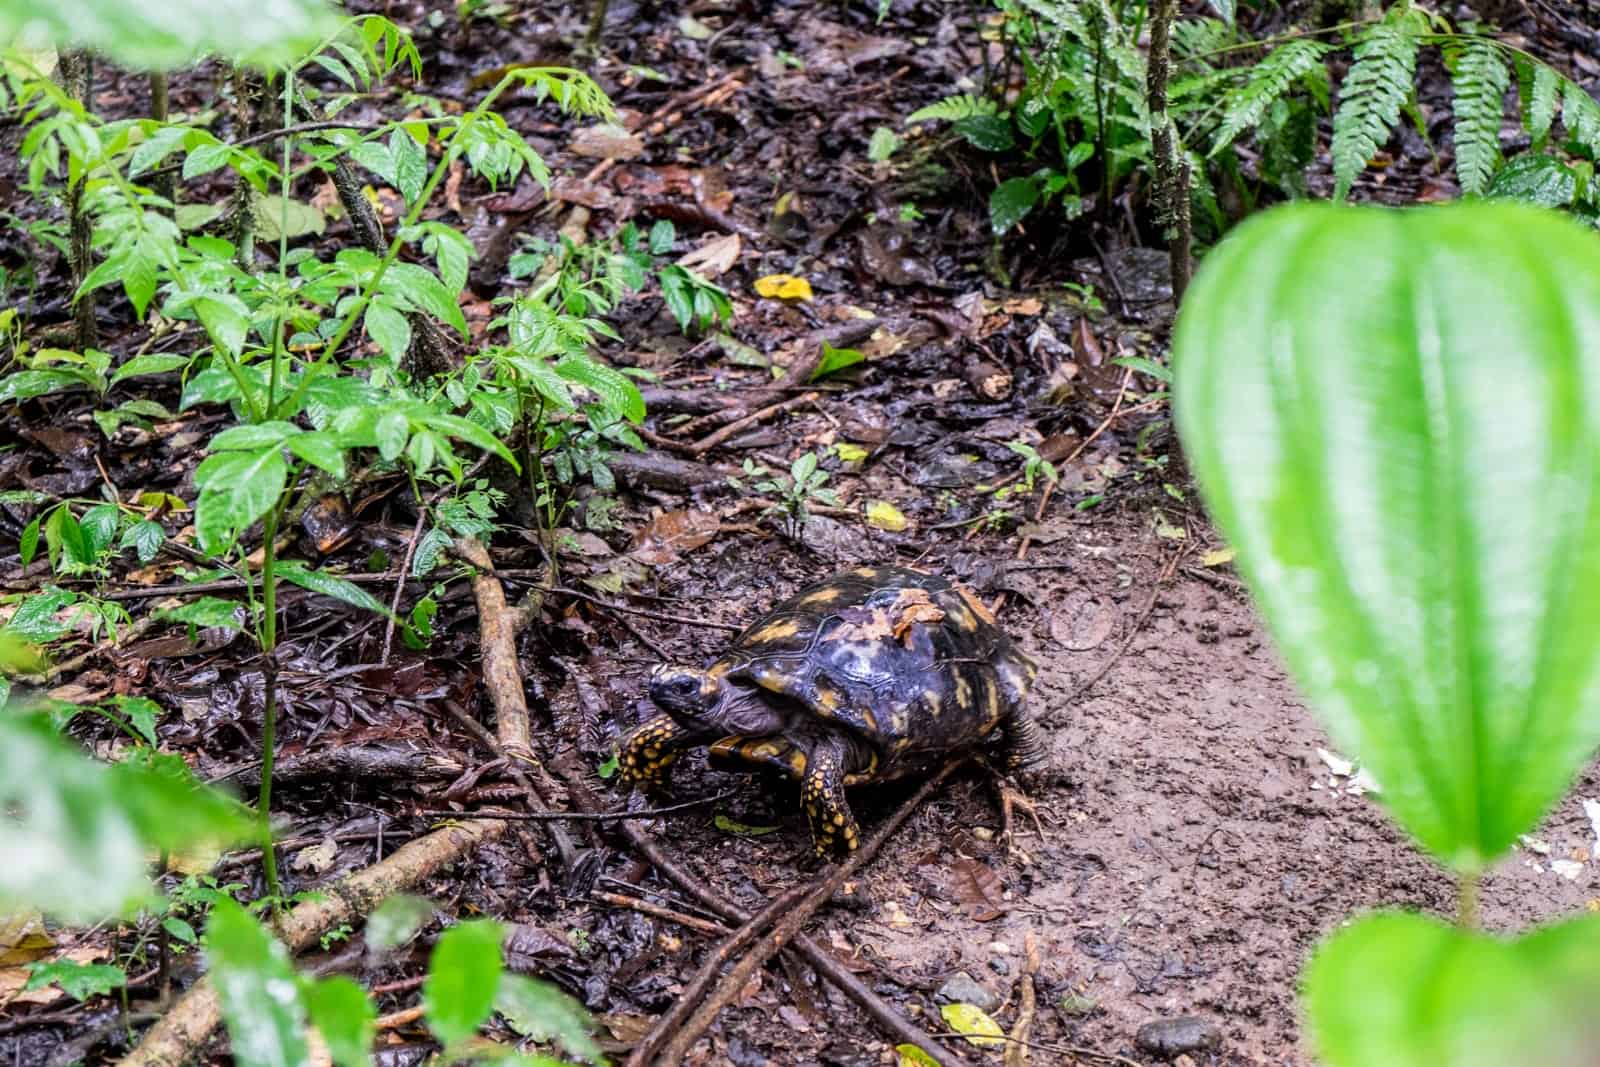 A black tortoise with yellow spots on its shell, walking through the muddy jungle floor of the Ecuador Amazon Rainforest. 